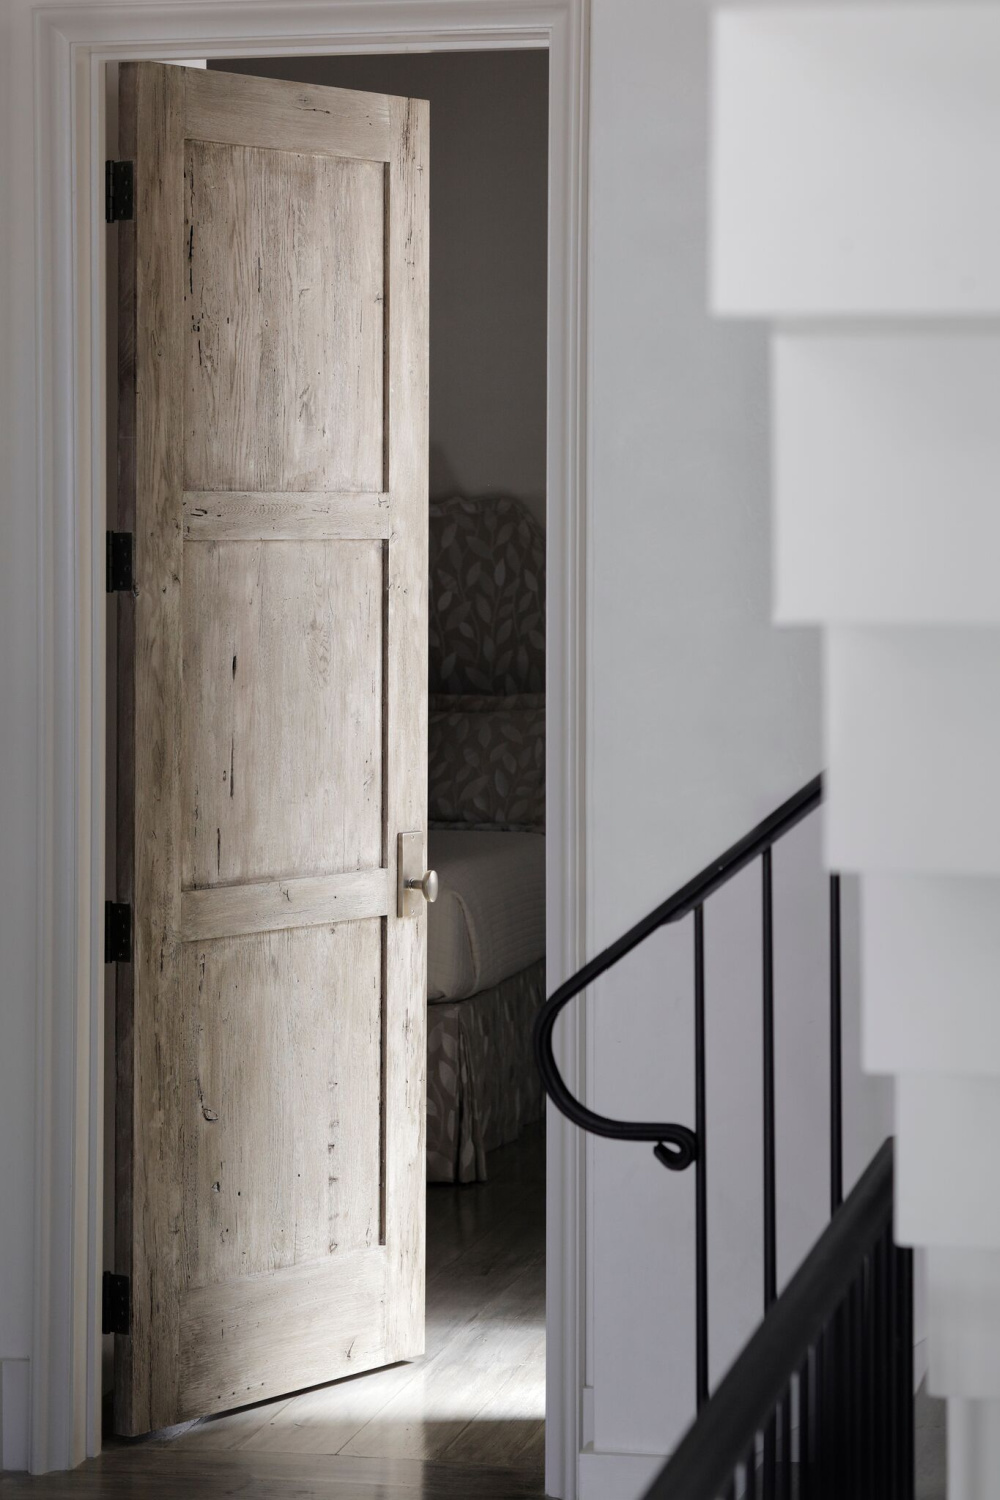 Rustic wood 3-panel door. Stunning interior design and Timeless Architecture Inspiration: Jeffrey Dungan. Photo: William Abranowicz. #classicdesign #traditional #architecture #jeffreydungan #sophisticateddesign #architect